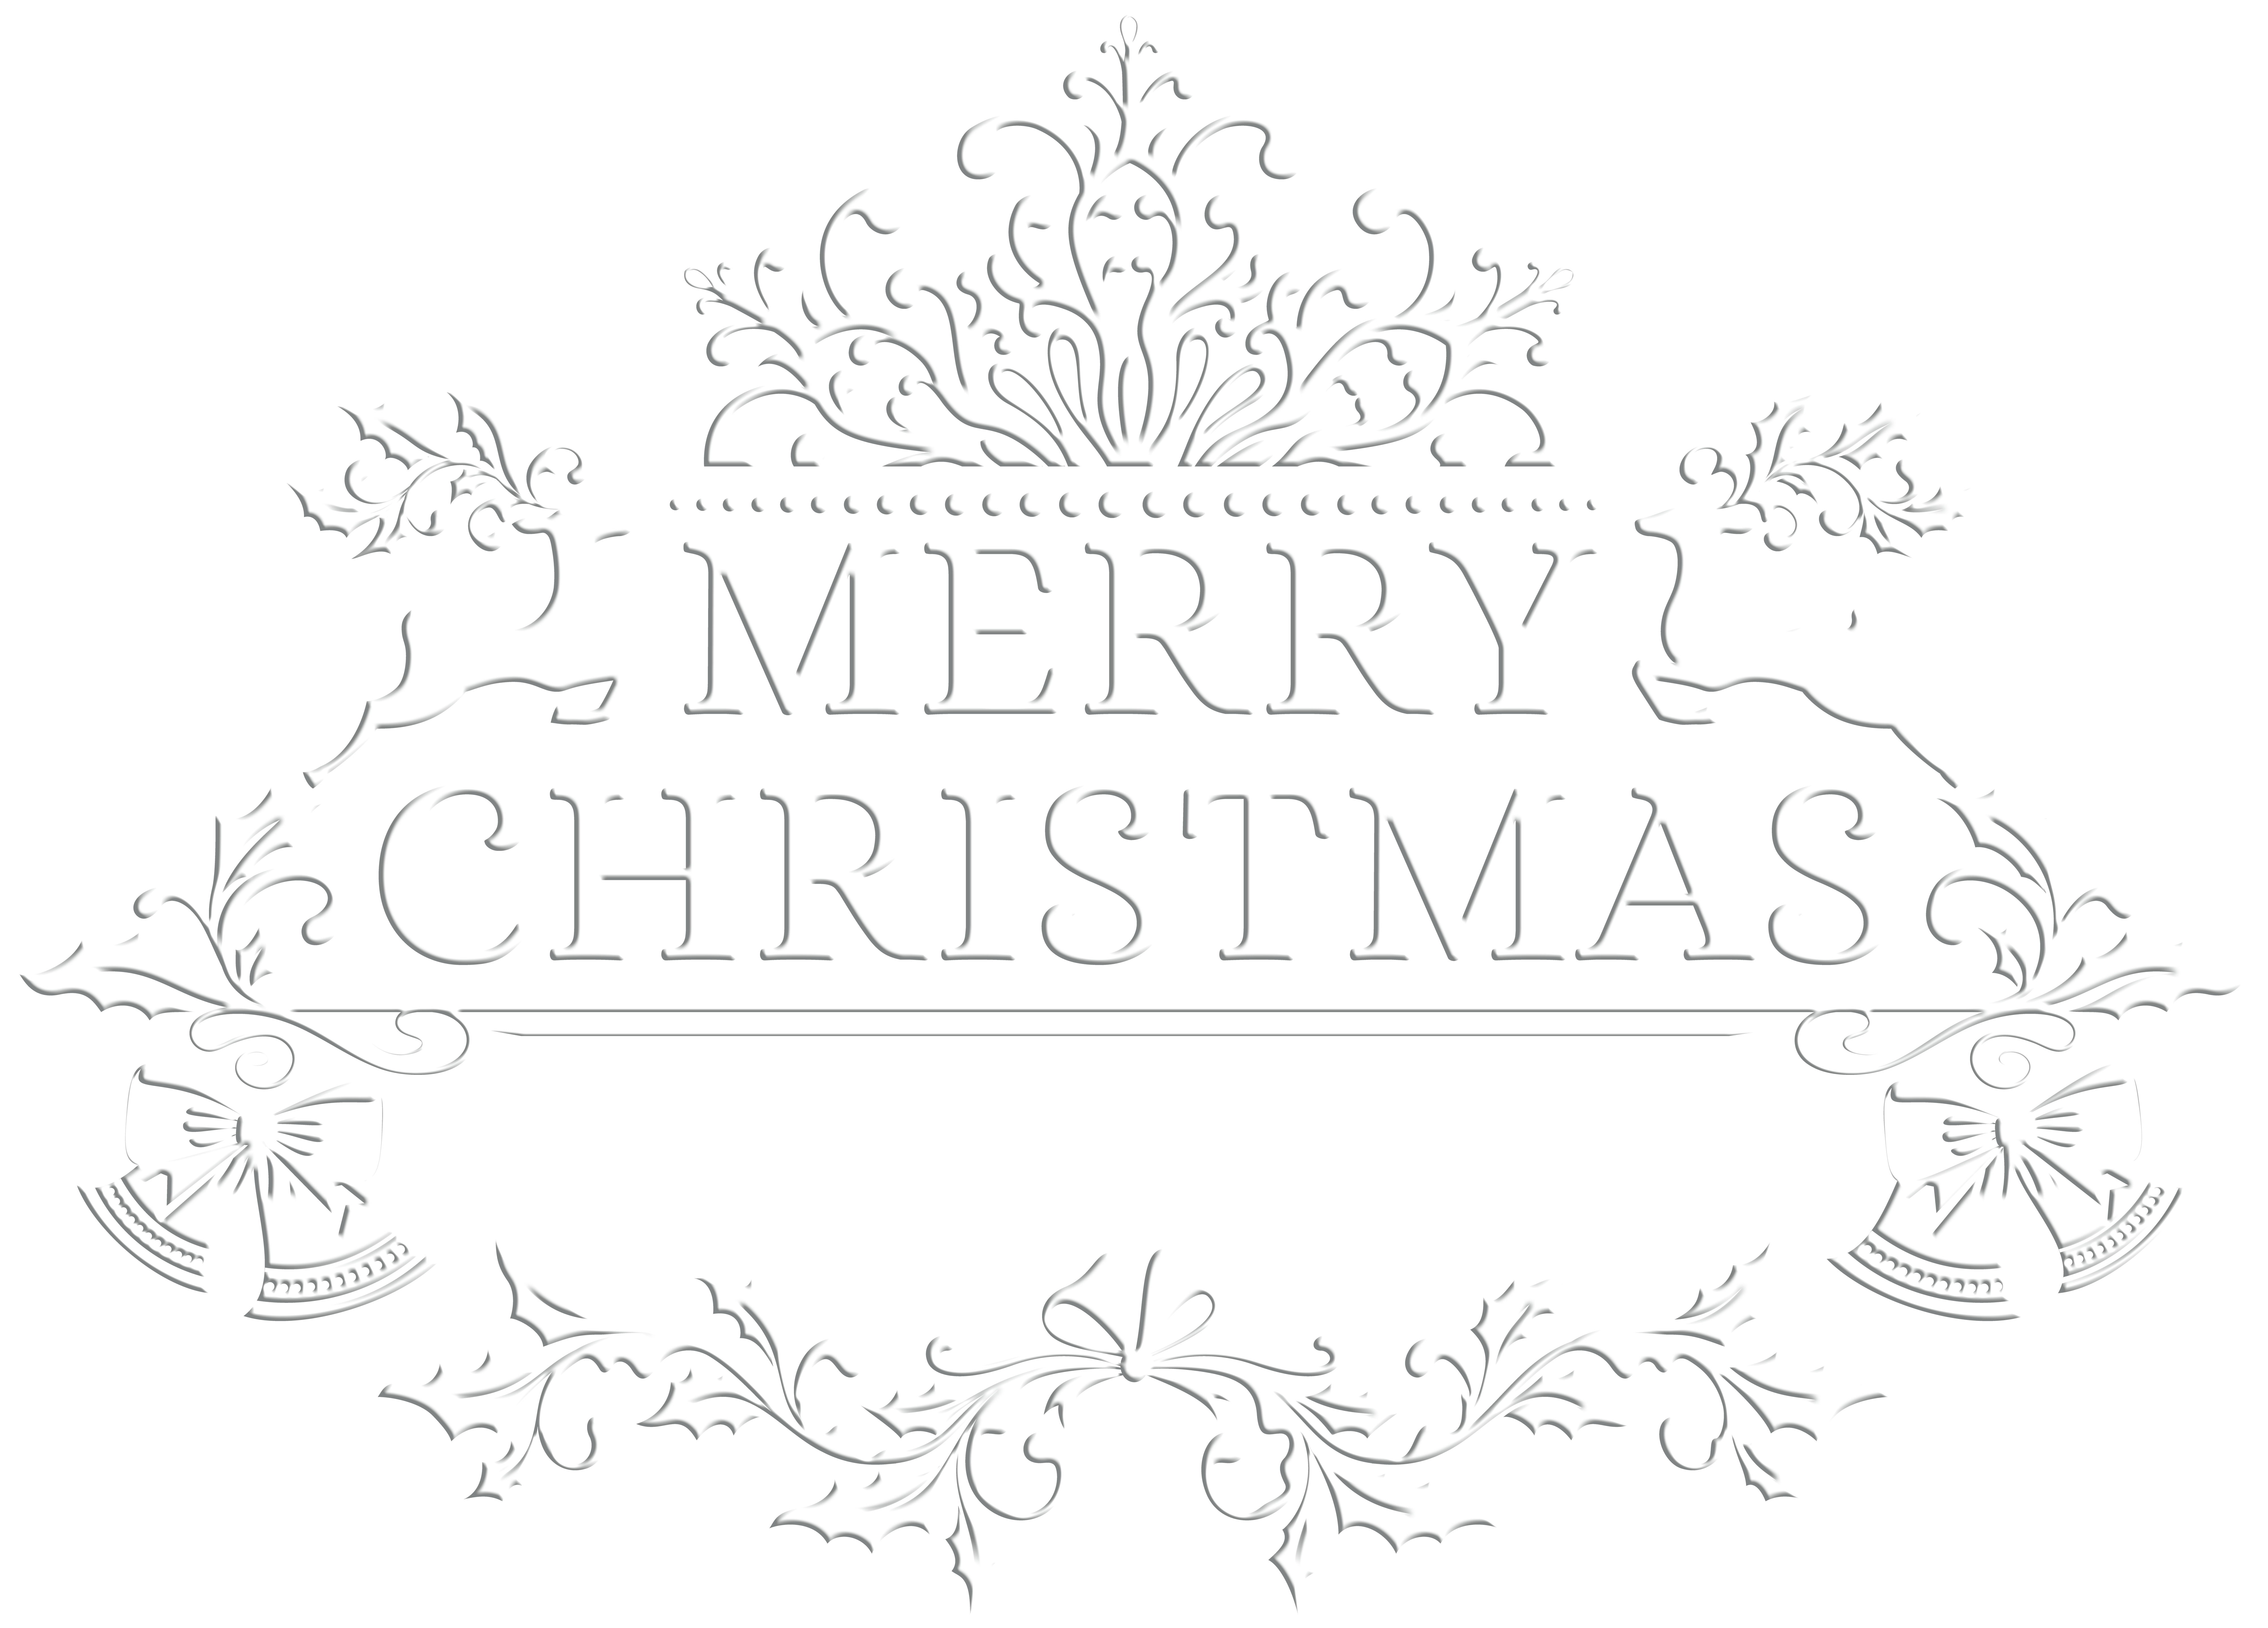 merry christmas images black and white